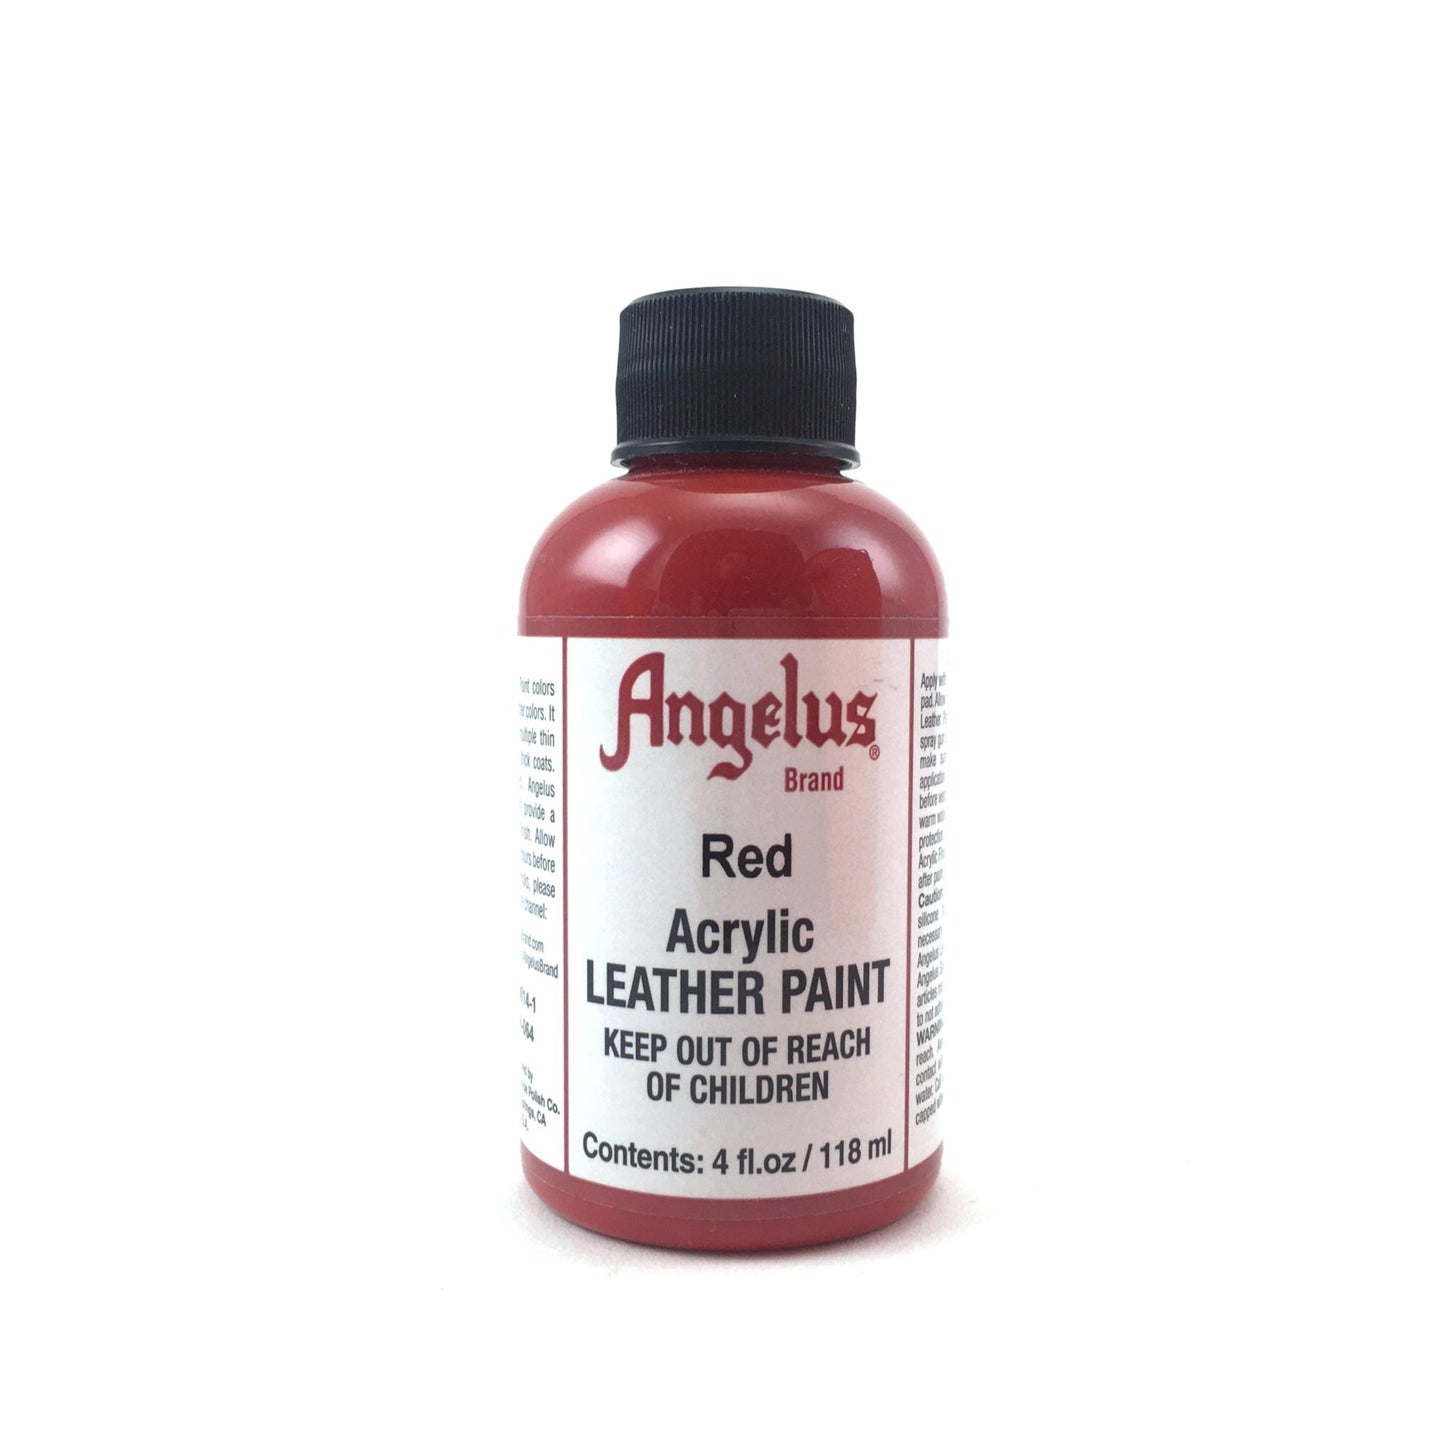 Angelus Acrylic Leather Paint - 4 oz. - Matte Red by Angelus - K. A. Artist Shop